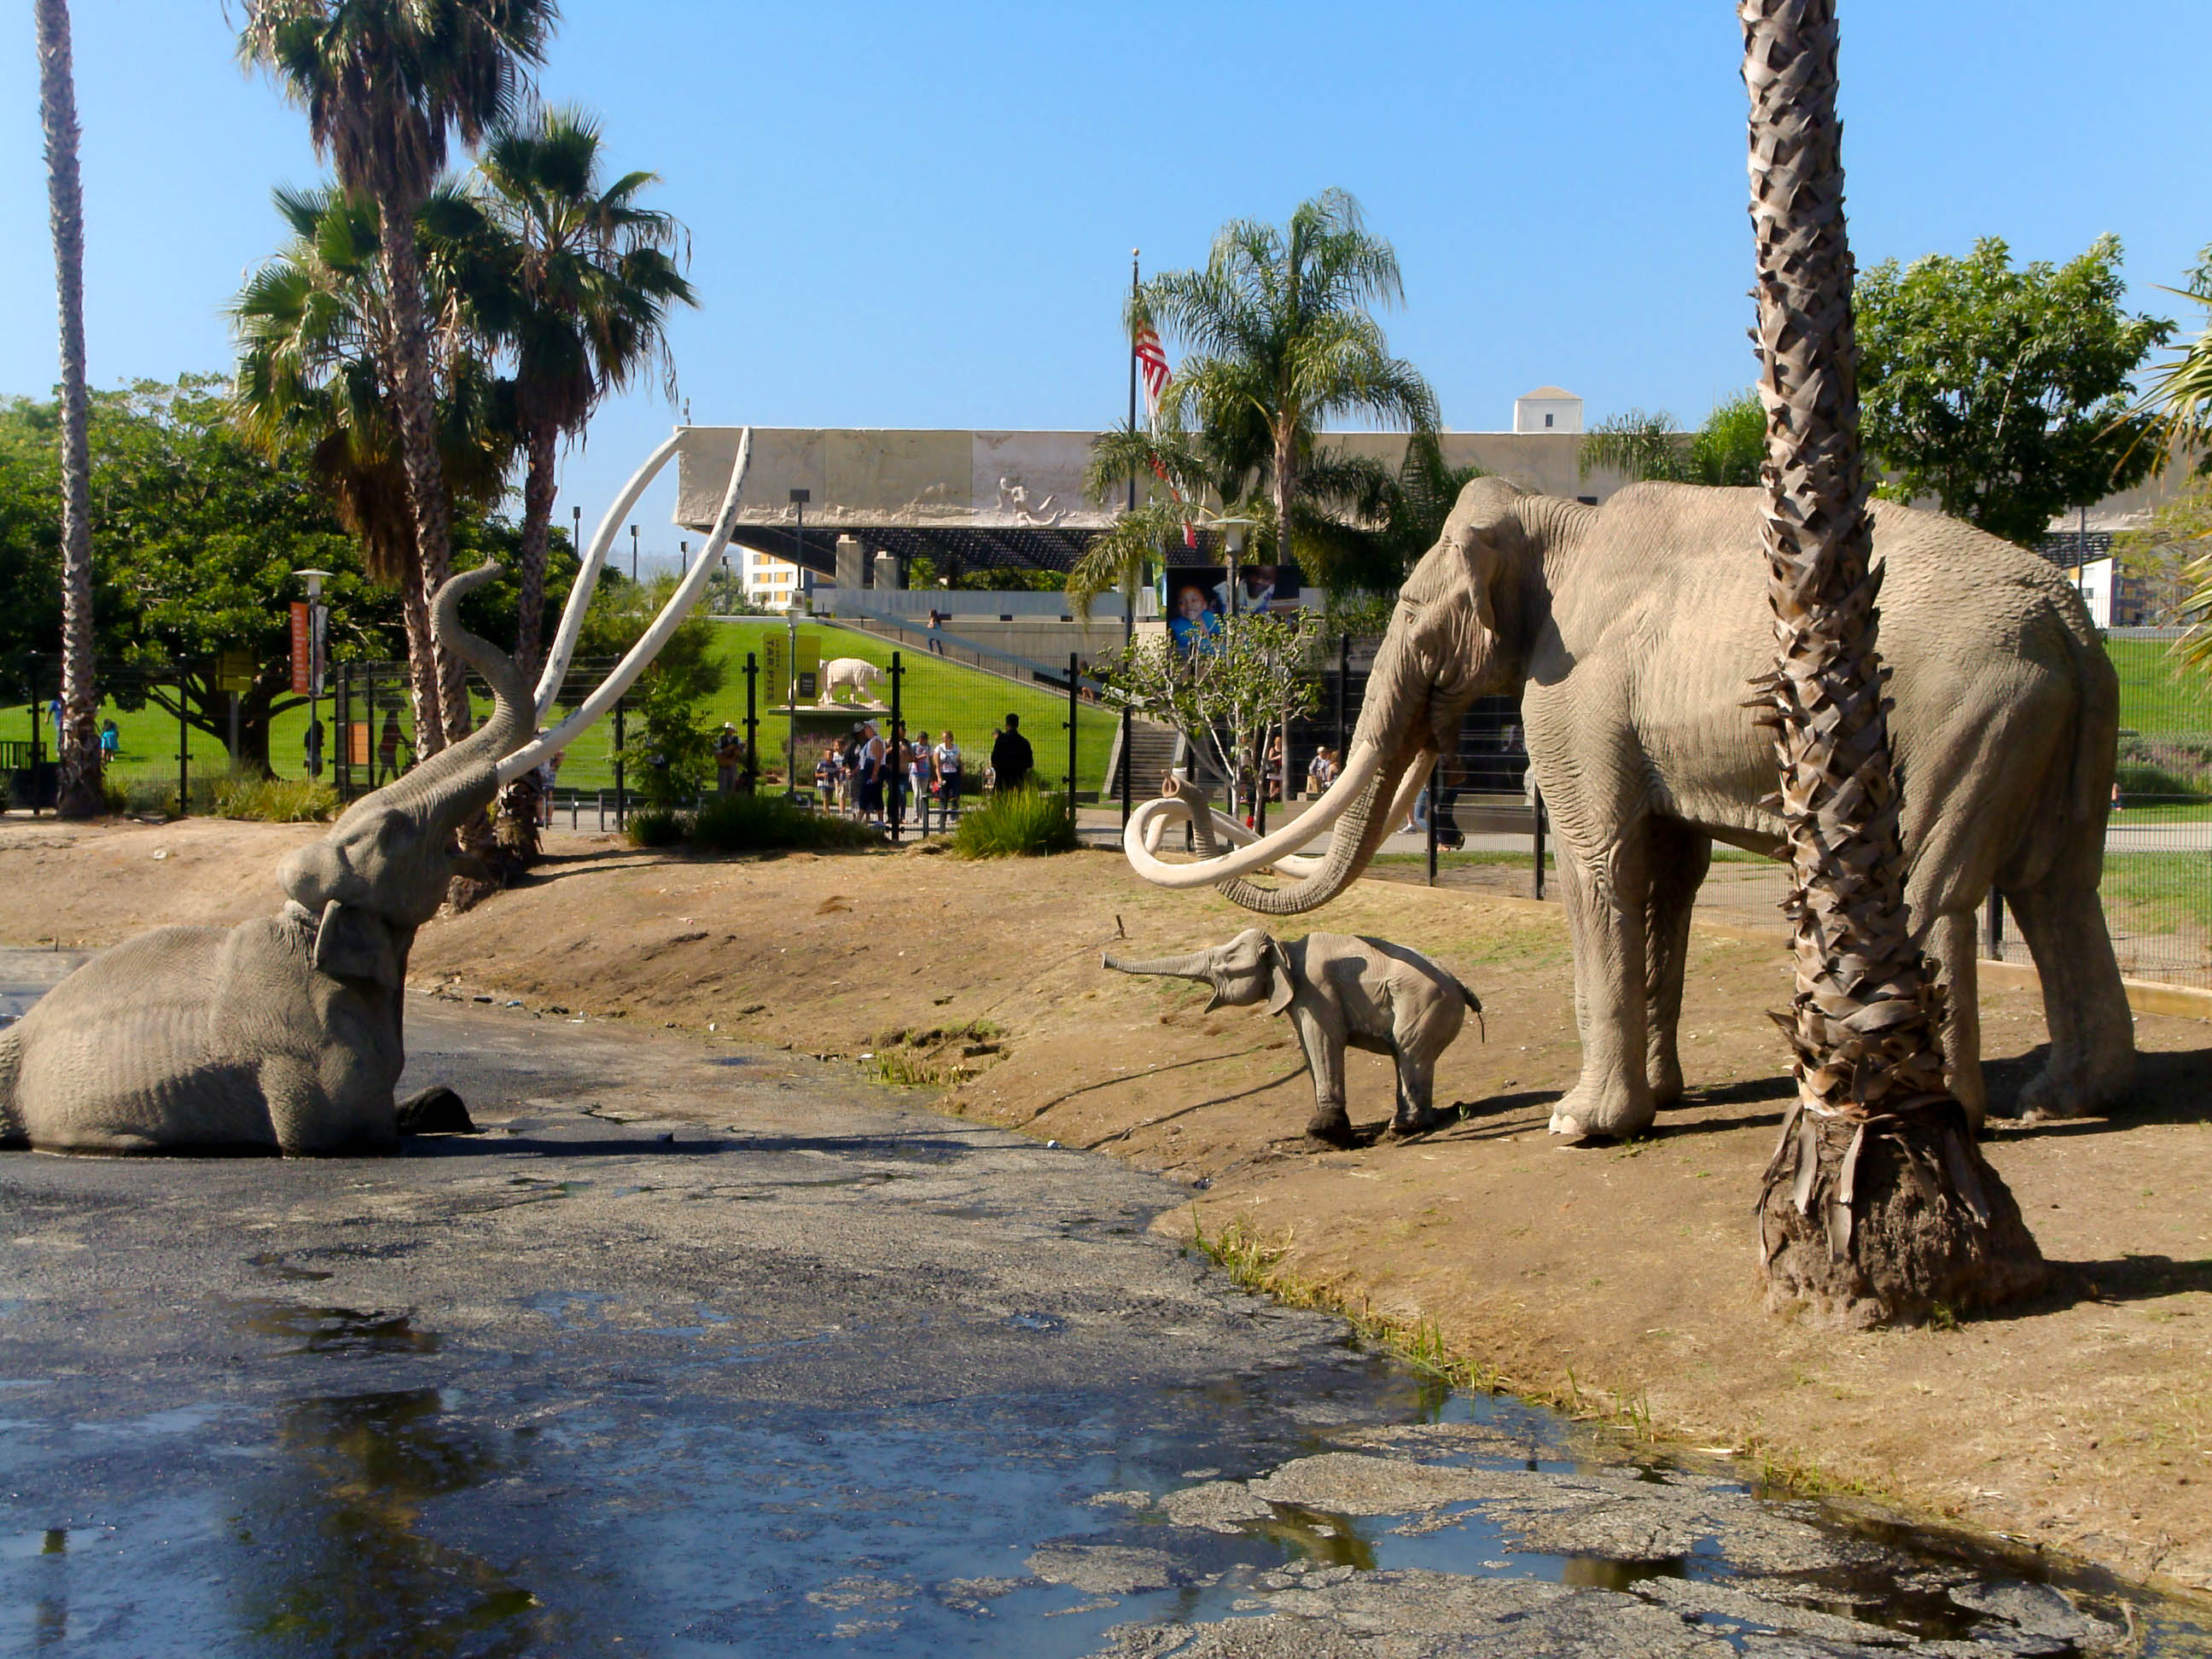 La Brea Tar Pits - A Surprising Find in the Heart of Los Angeles